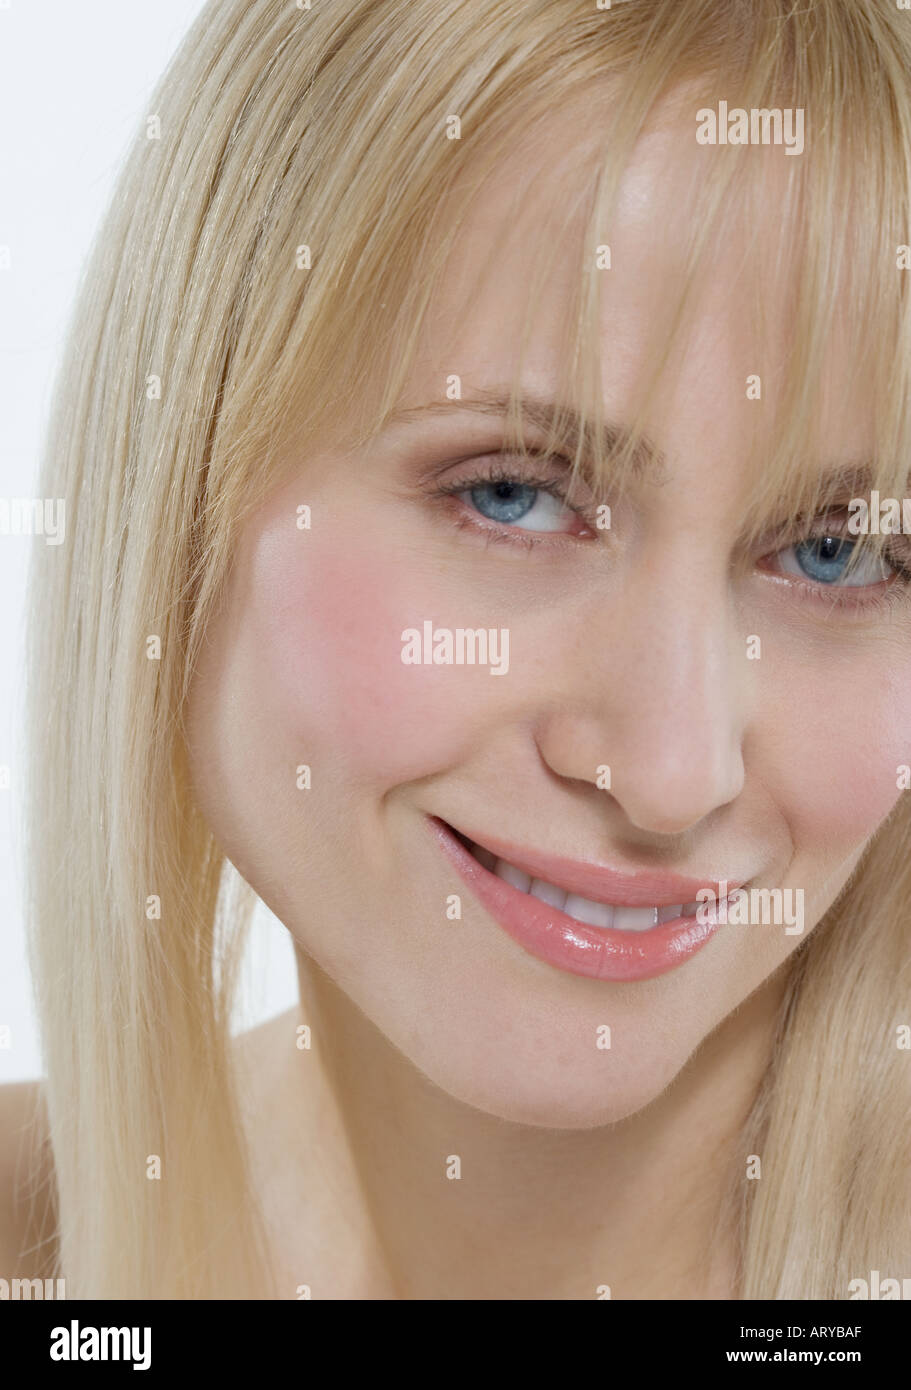 Headshot of woman with coy smile Stock Photo